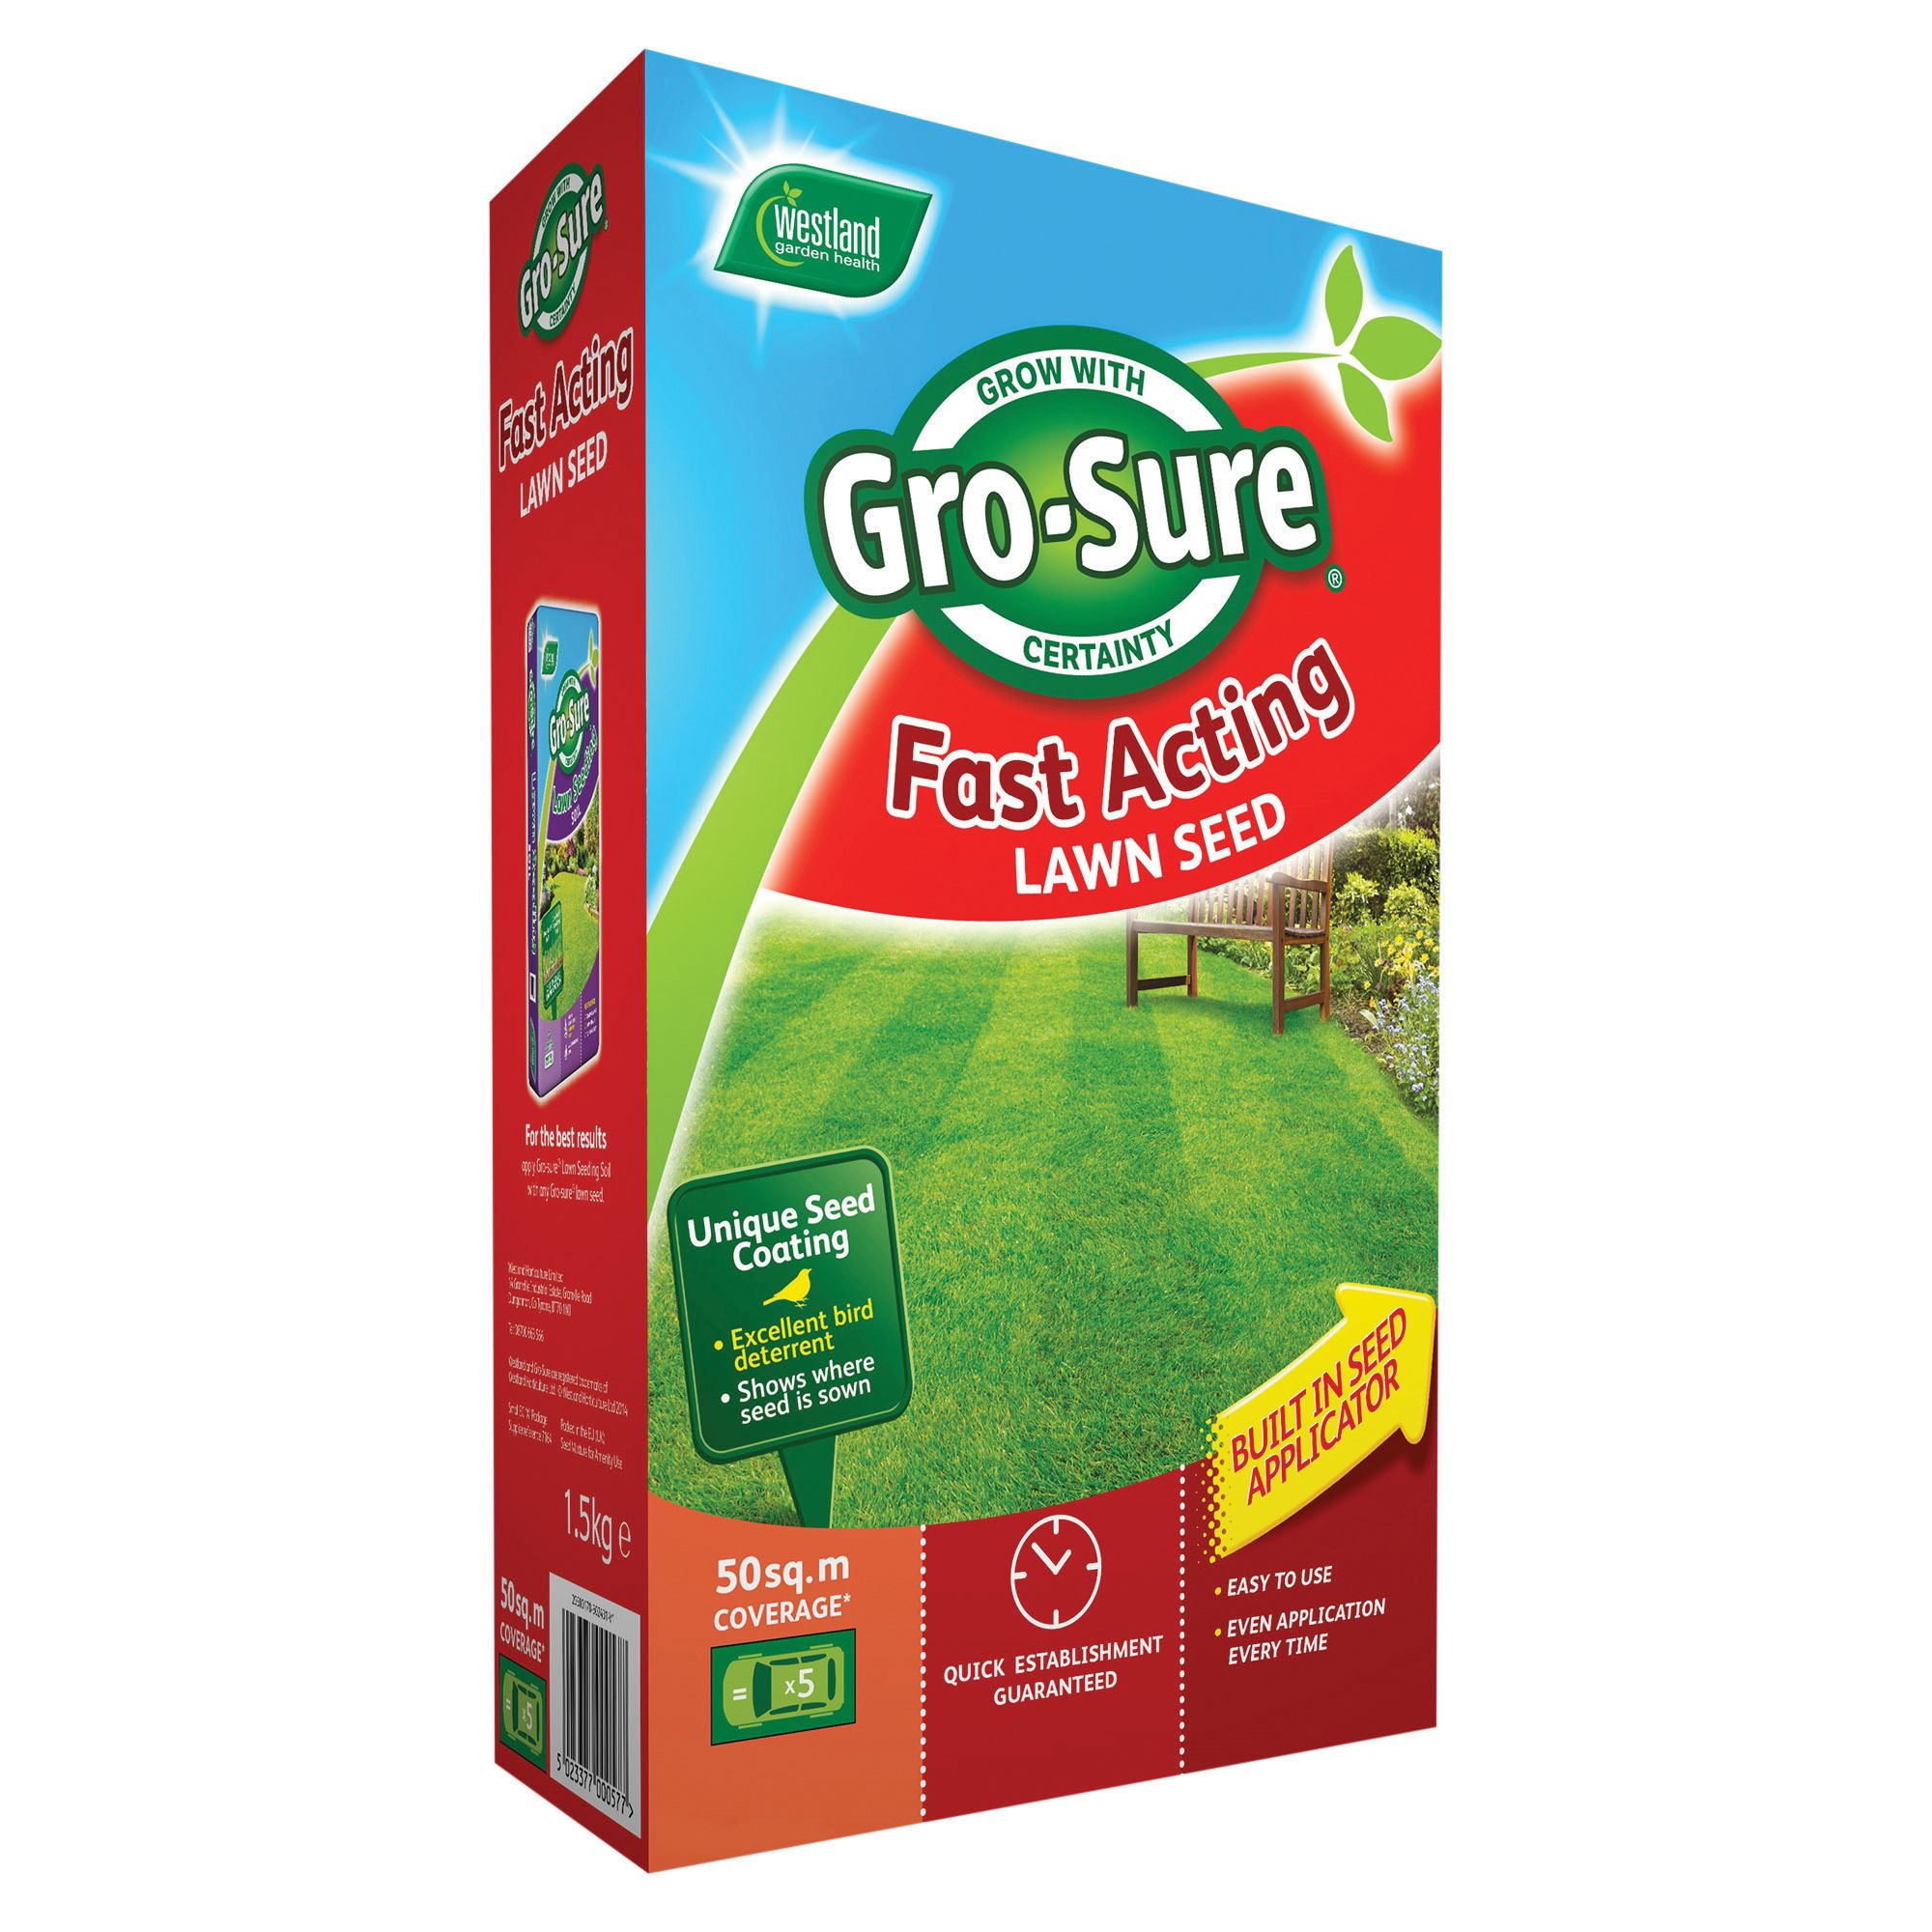 Image of Gro-Sure Fast Acting Lawn Seed - 50m² - 1.5kg